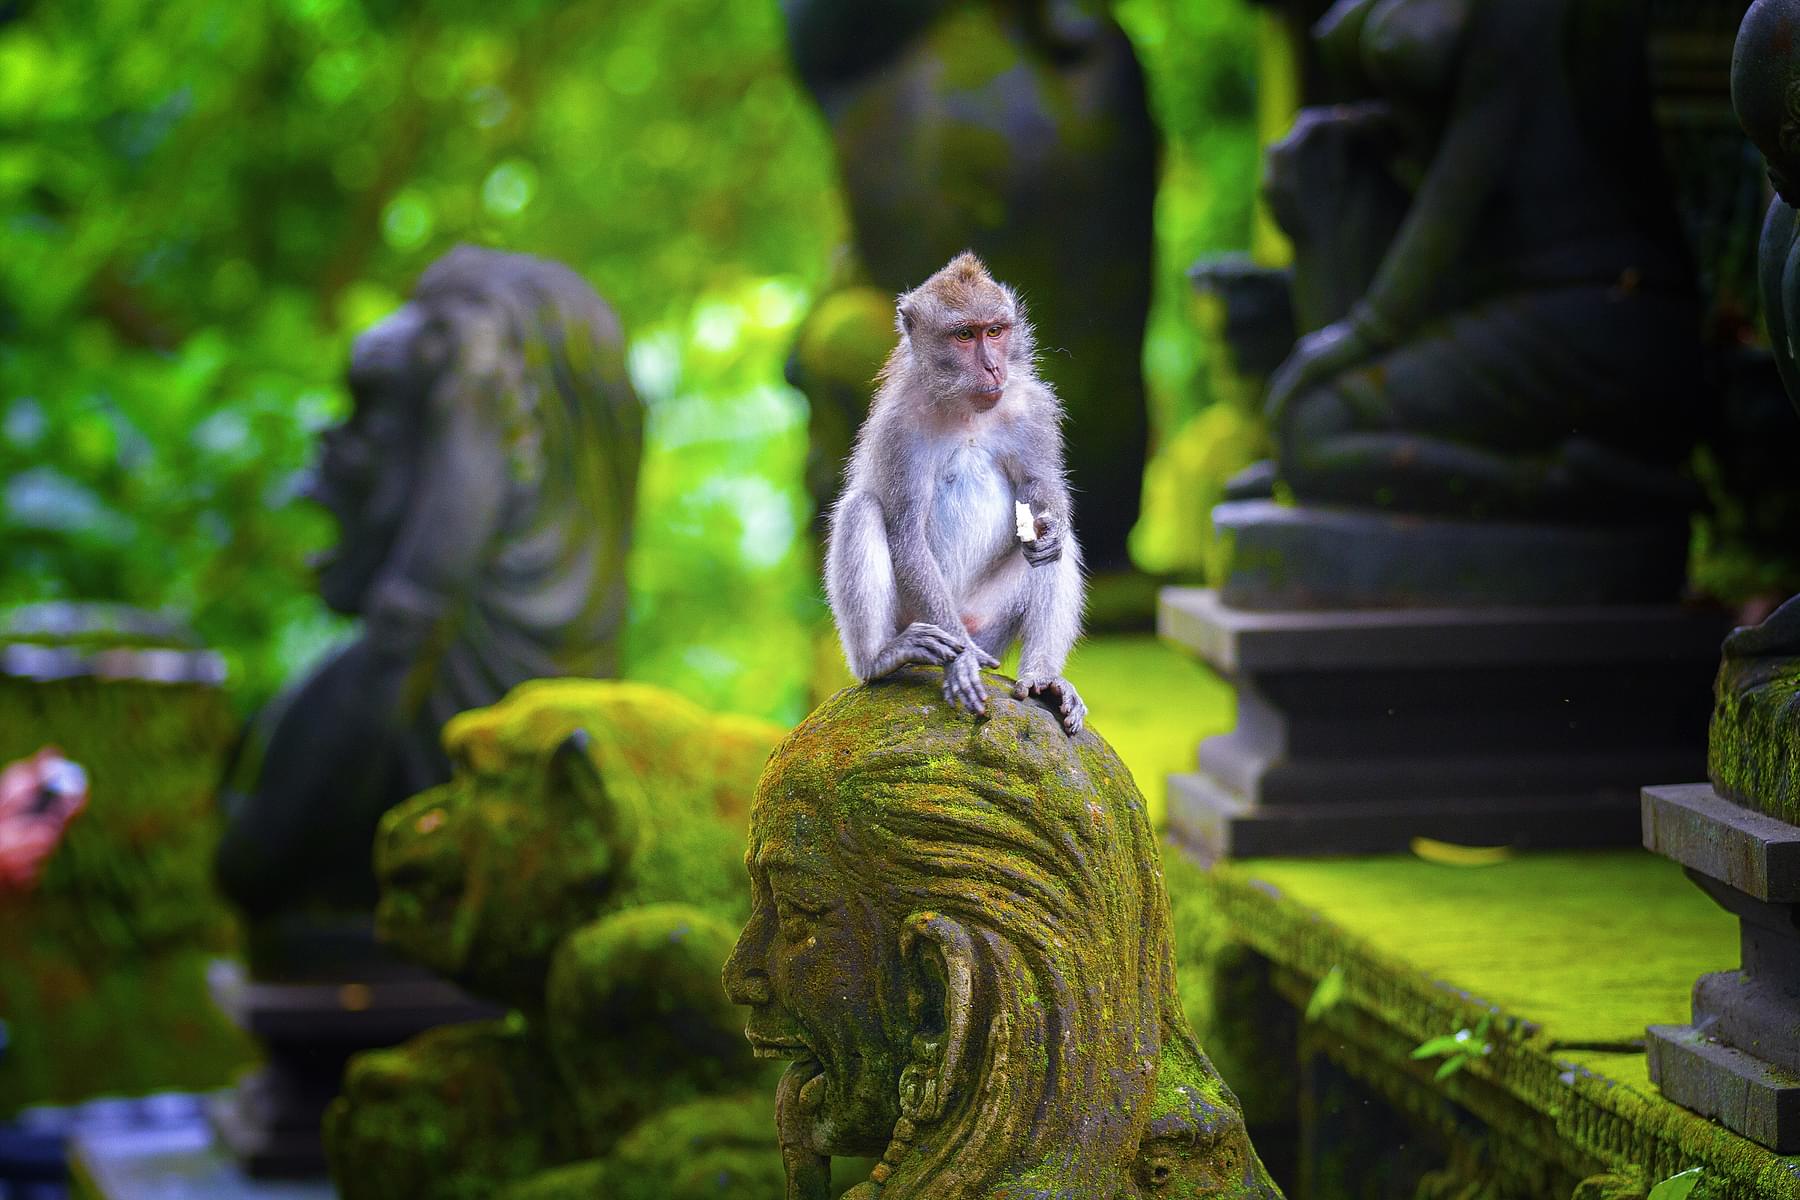 Witness Balinese long-tailed macaque